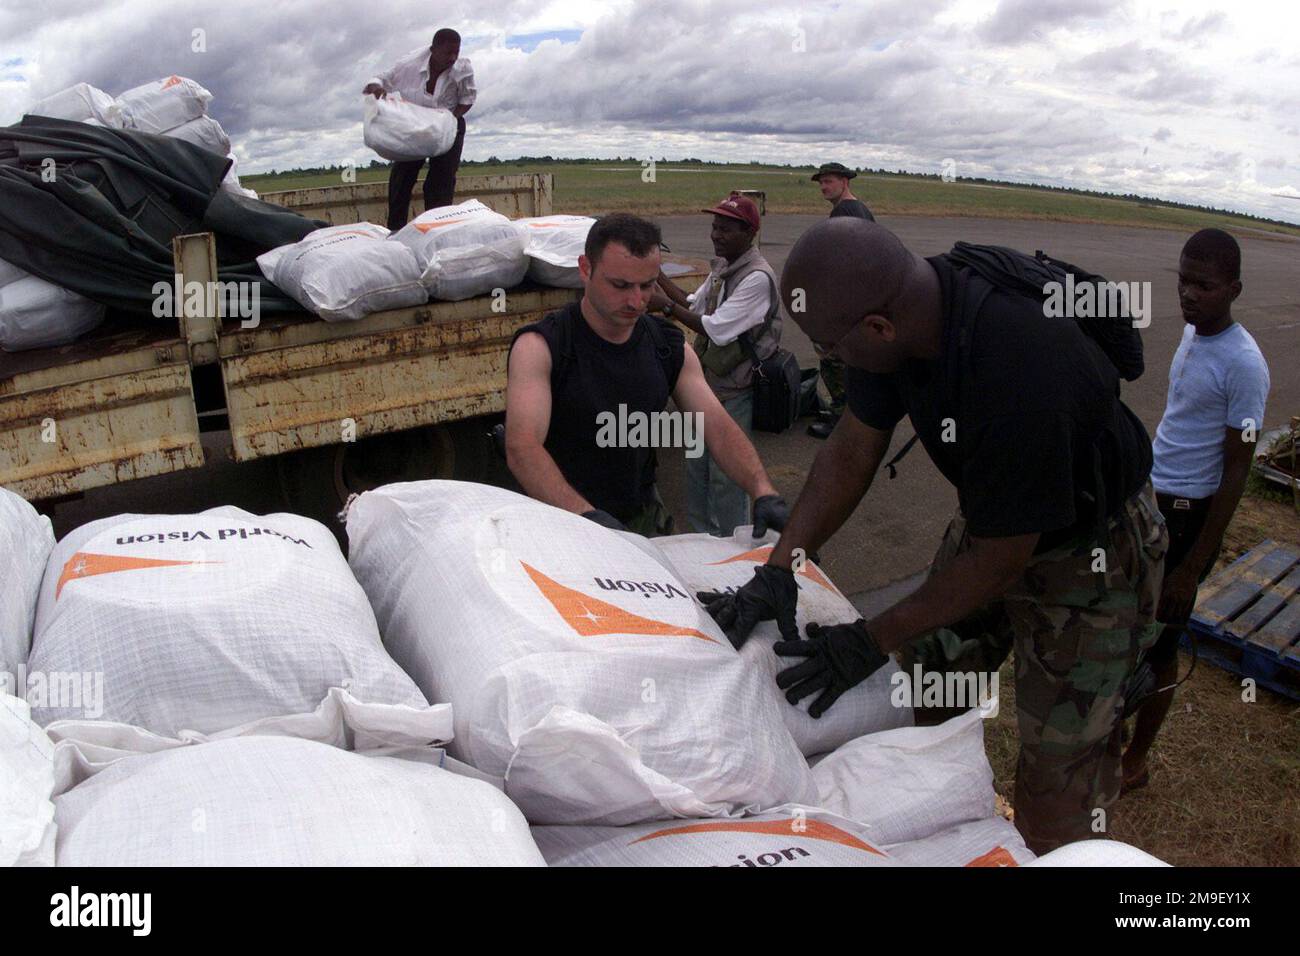 Medium shot. SENIOR AIRMAN Jad Aoun, and Technical Sergeant. Dennis Washington, both Air Transportation Specialists and members of the 86th Air Mobility Squadron, Ramstein Air Base, Germany, with help of local laborers, build pallets of humanitarian supplies at the International Airport at Maputo, Mozambique, Africa, 17 March 2000. Their team is deployed in support of Operation Atlas Response, a Humanitarian Aid Operation to help the people of Mozambique, after severe flooding displaced over a million people from their homes. Subject Operation/Series: ATLAS RESPONSE Base: Maputo State: Inhamba Stock Photo